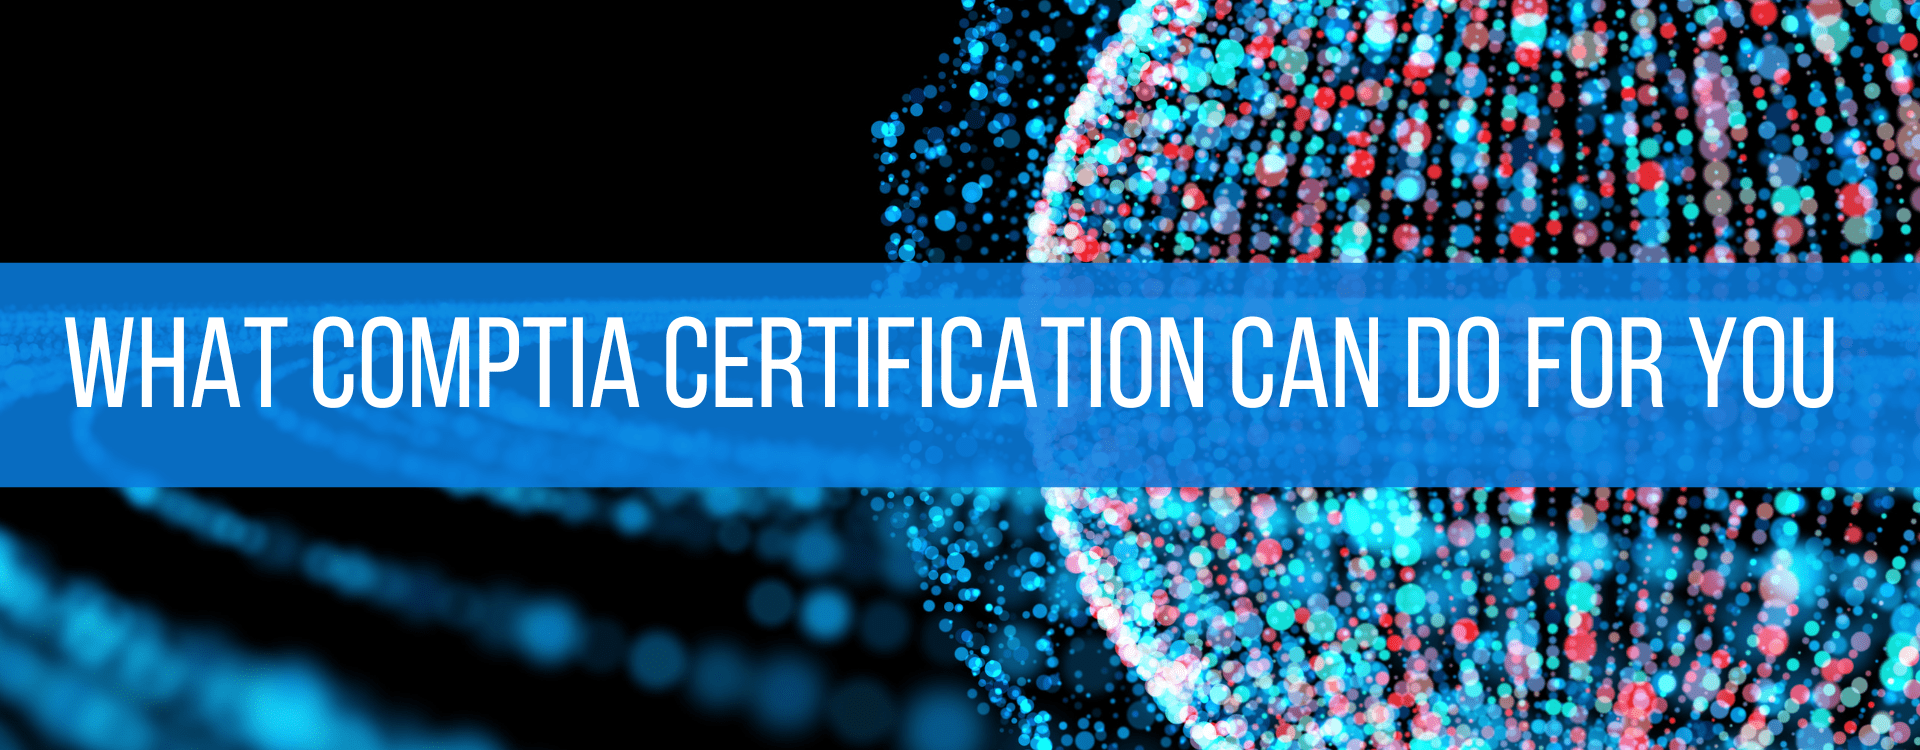 what comptia certification can do for you